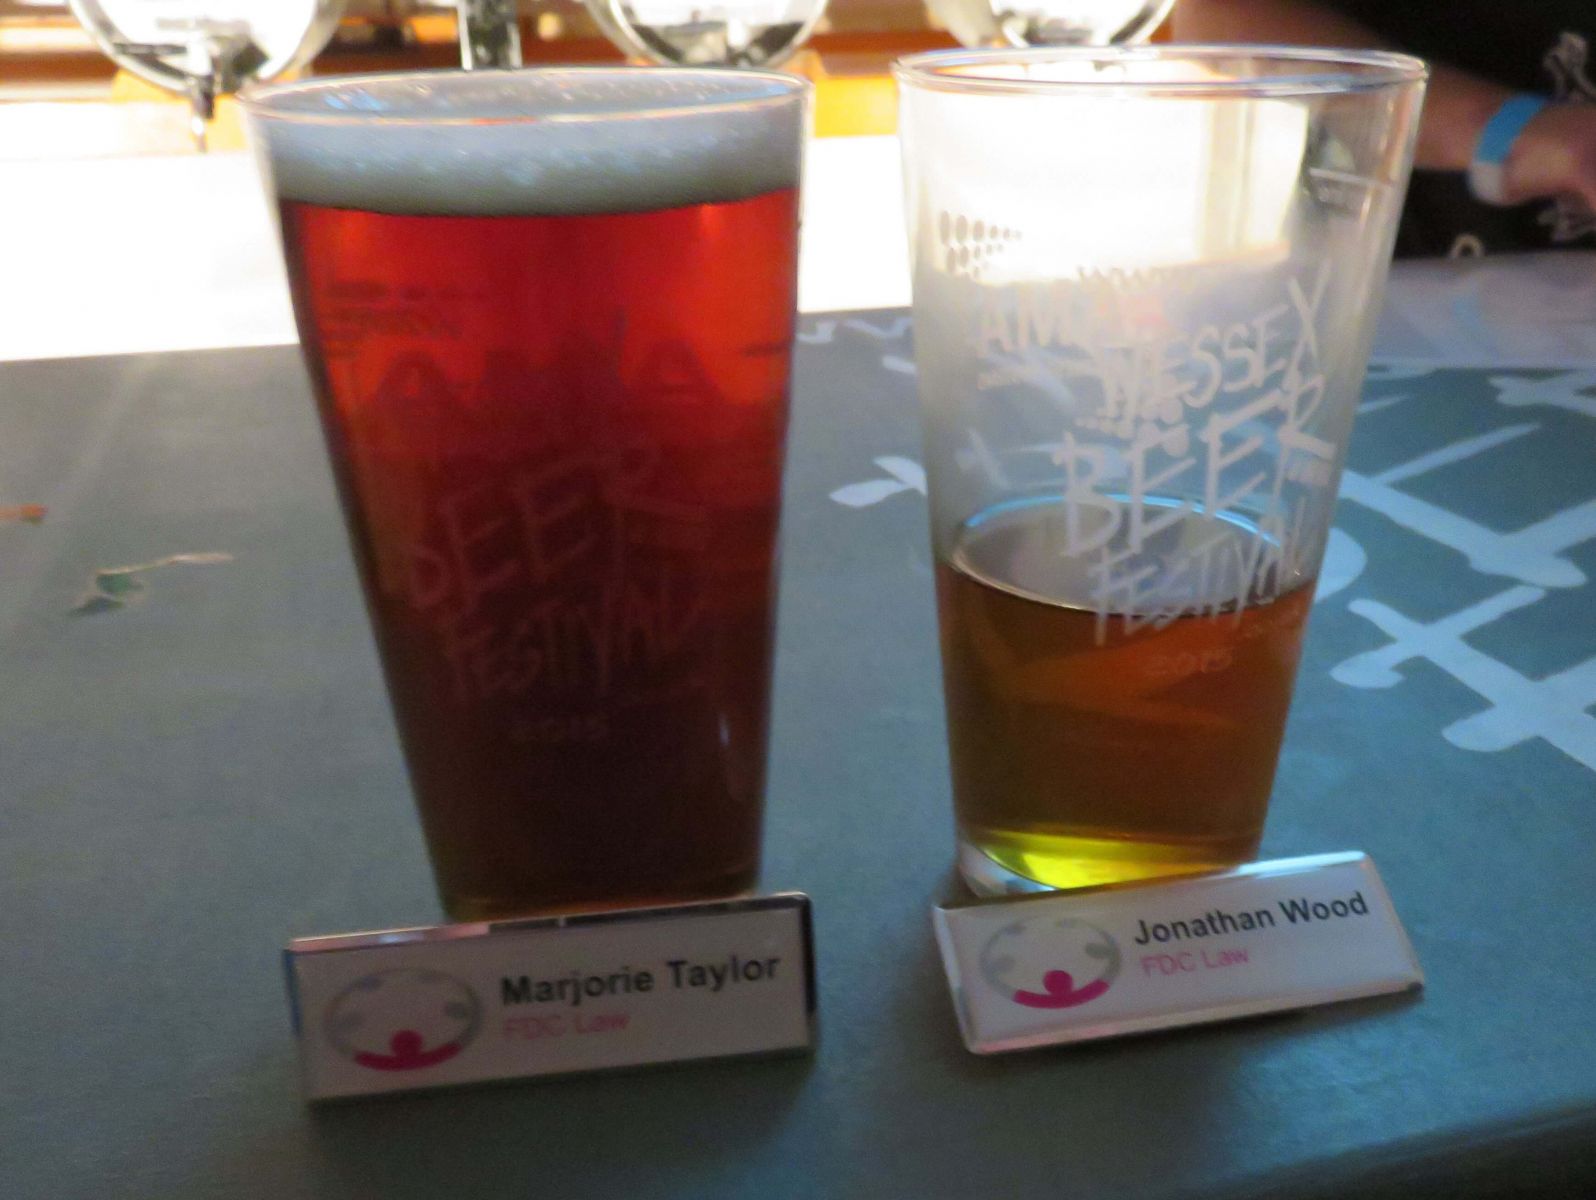 two beer glasses, one full, one half empty, plus 2 name badges